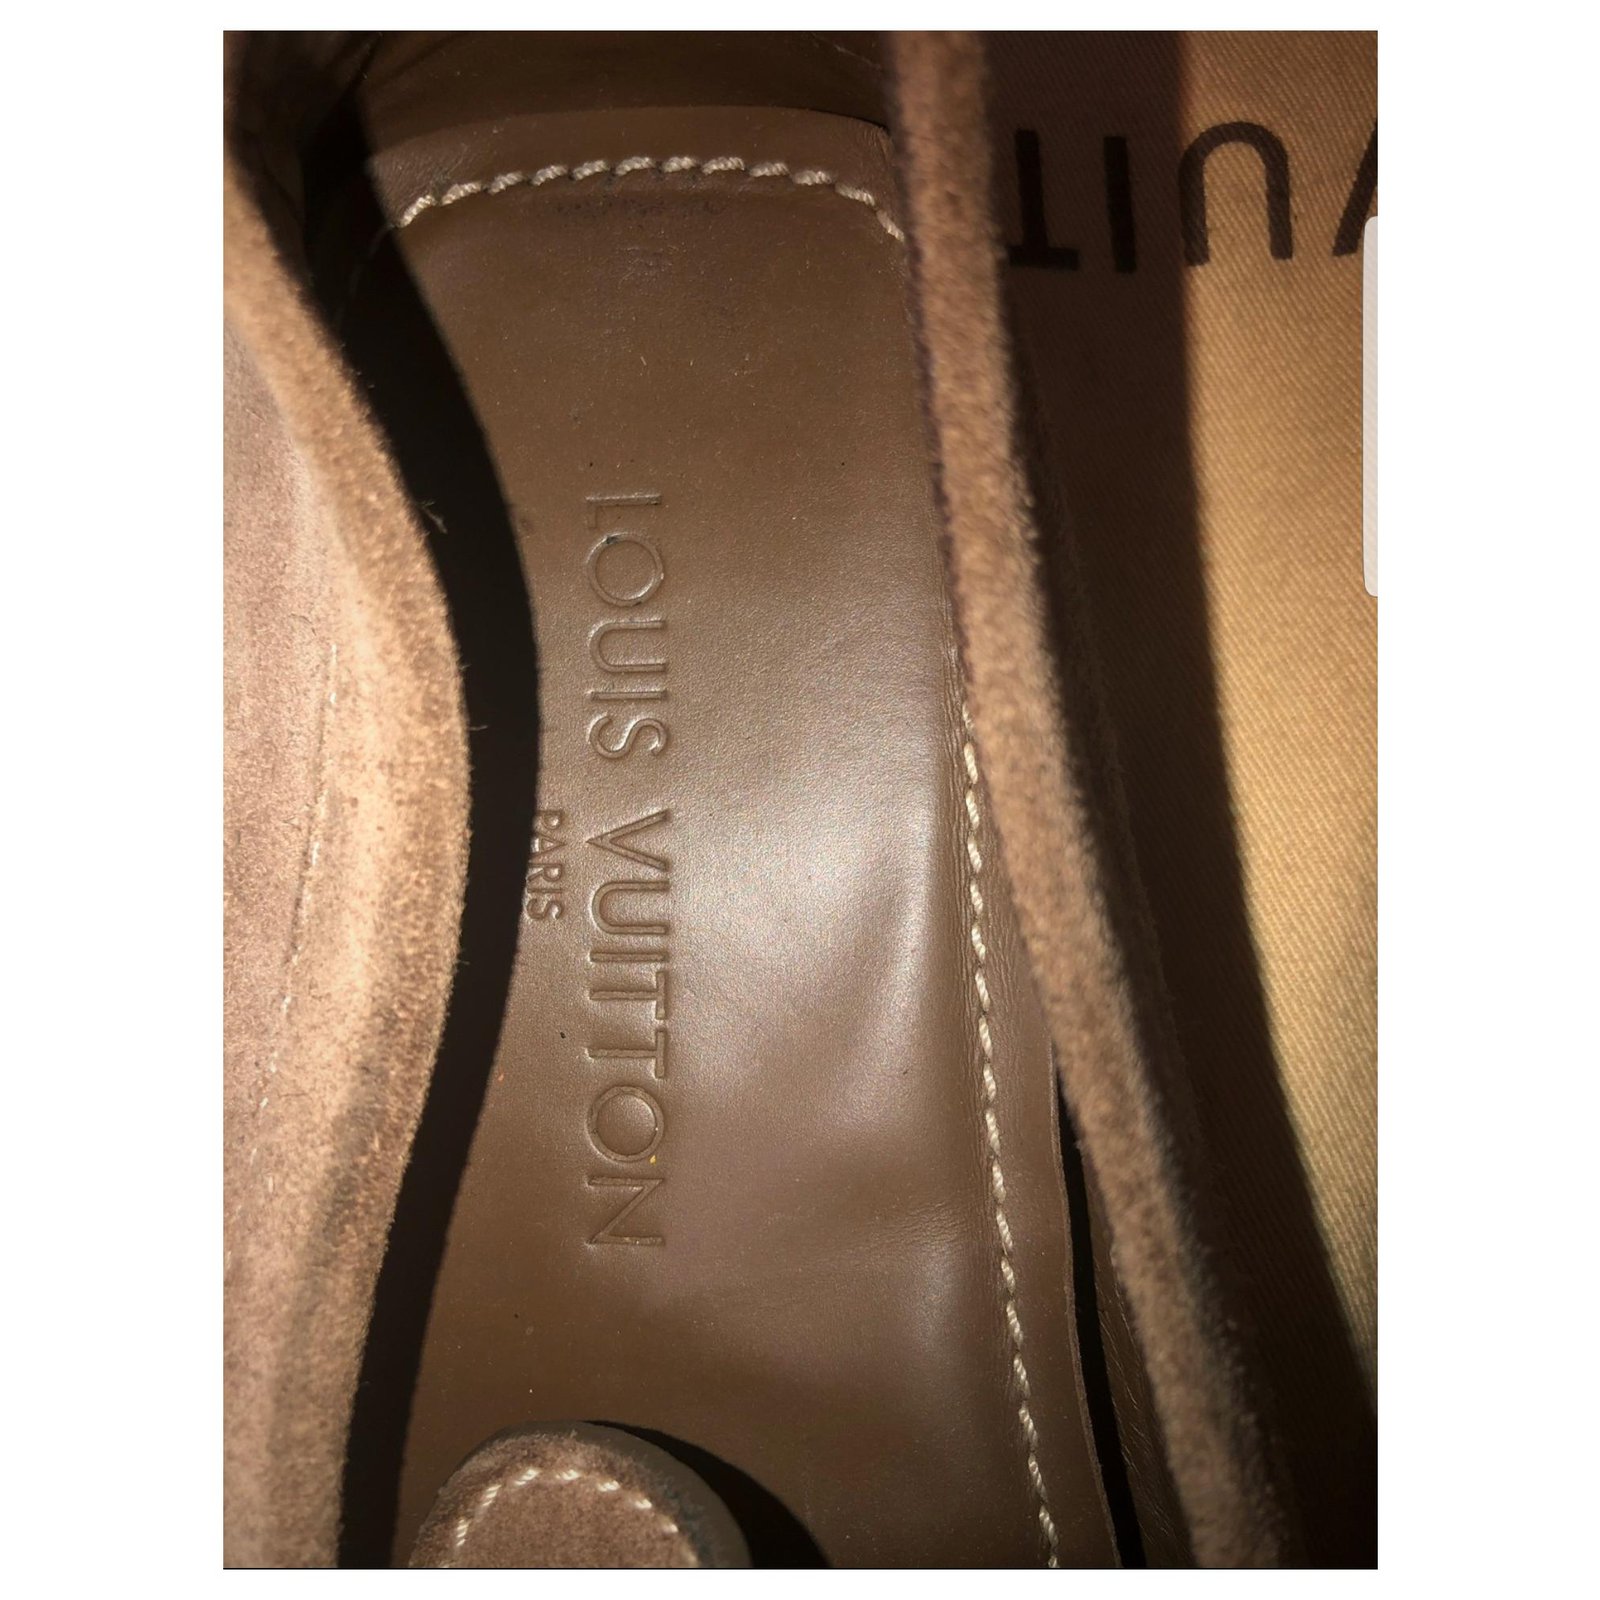 Monte carlo leather flats Louis Vuitton Brown size 6 UK in Leather -  35360963